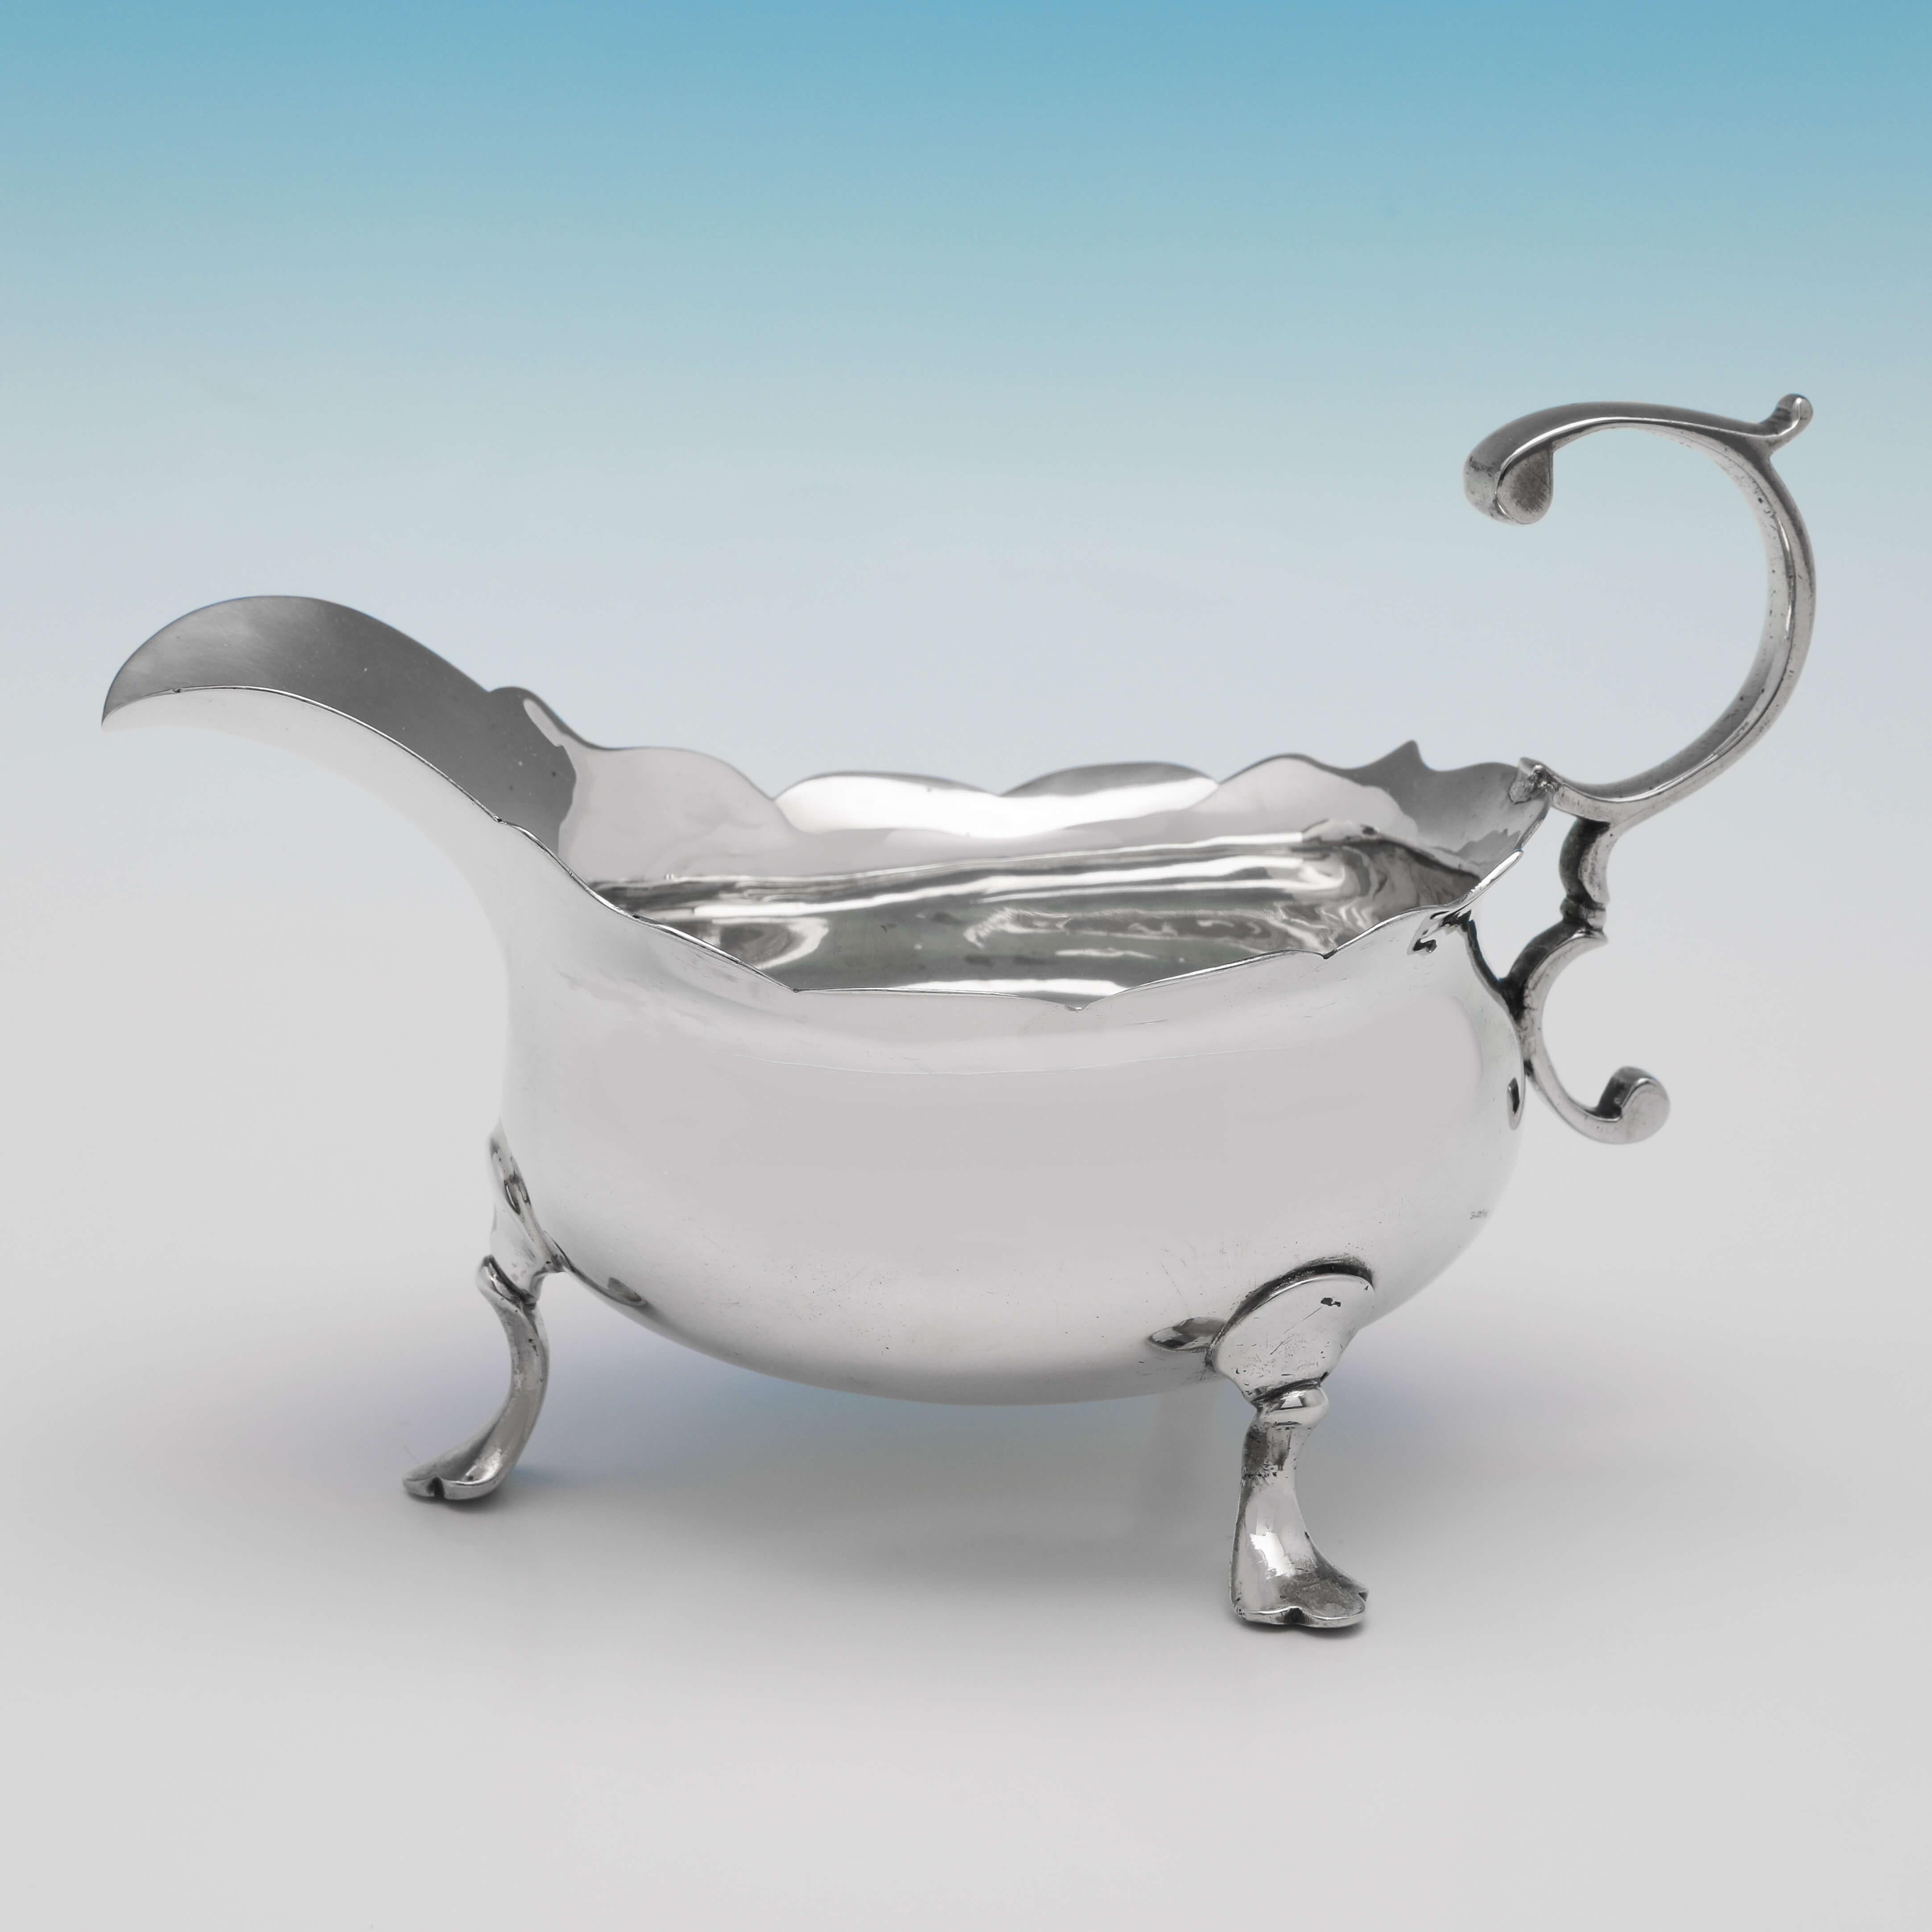 Hallmarked in London in 1751 by David Mowden, this handsome pair of George II, Antique Sterling Silver Sauce Boats, feature shaped edges, flying C-scroll handles, and stand on three feet. Each sauce boat measures 4